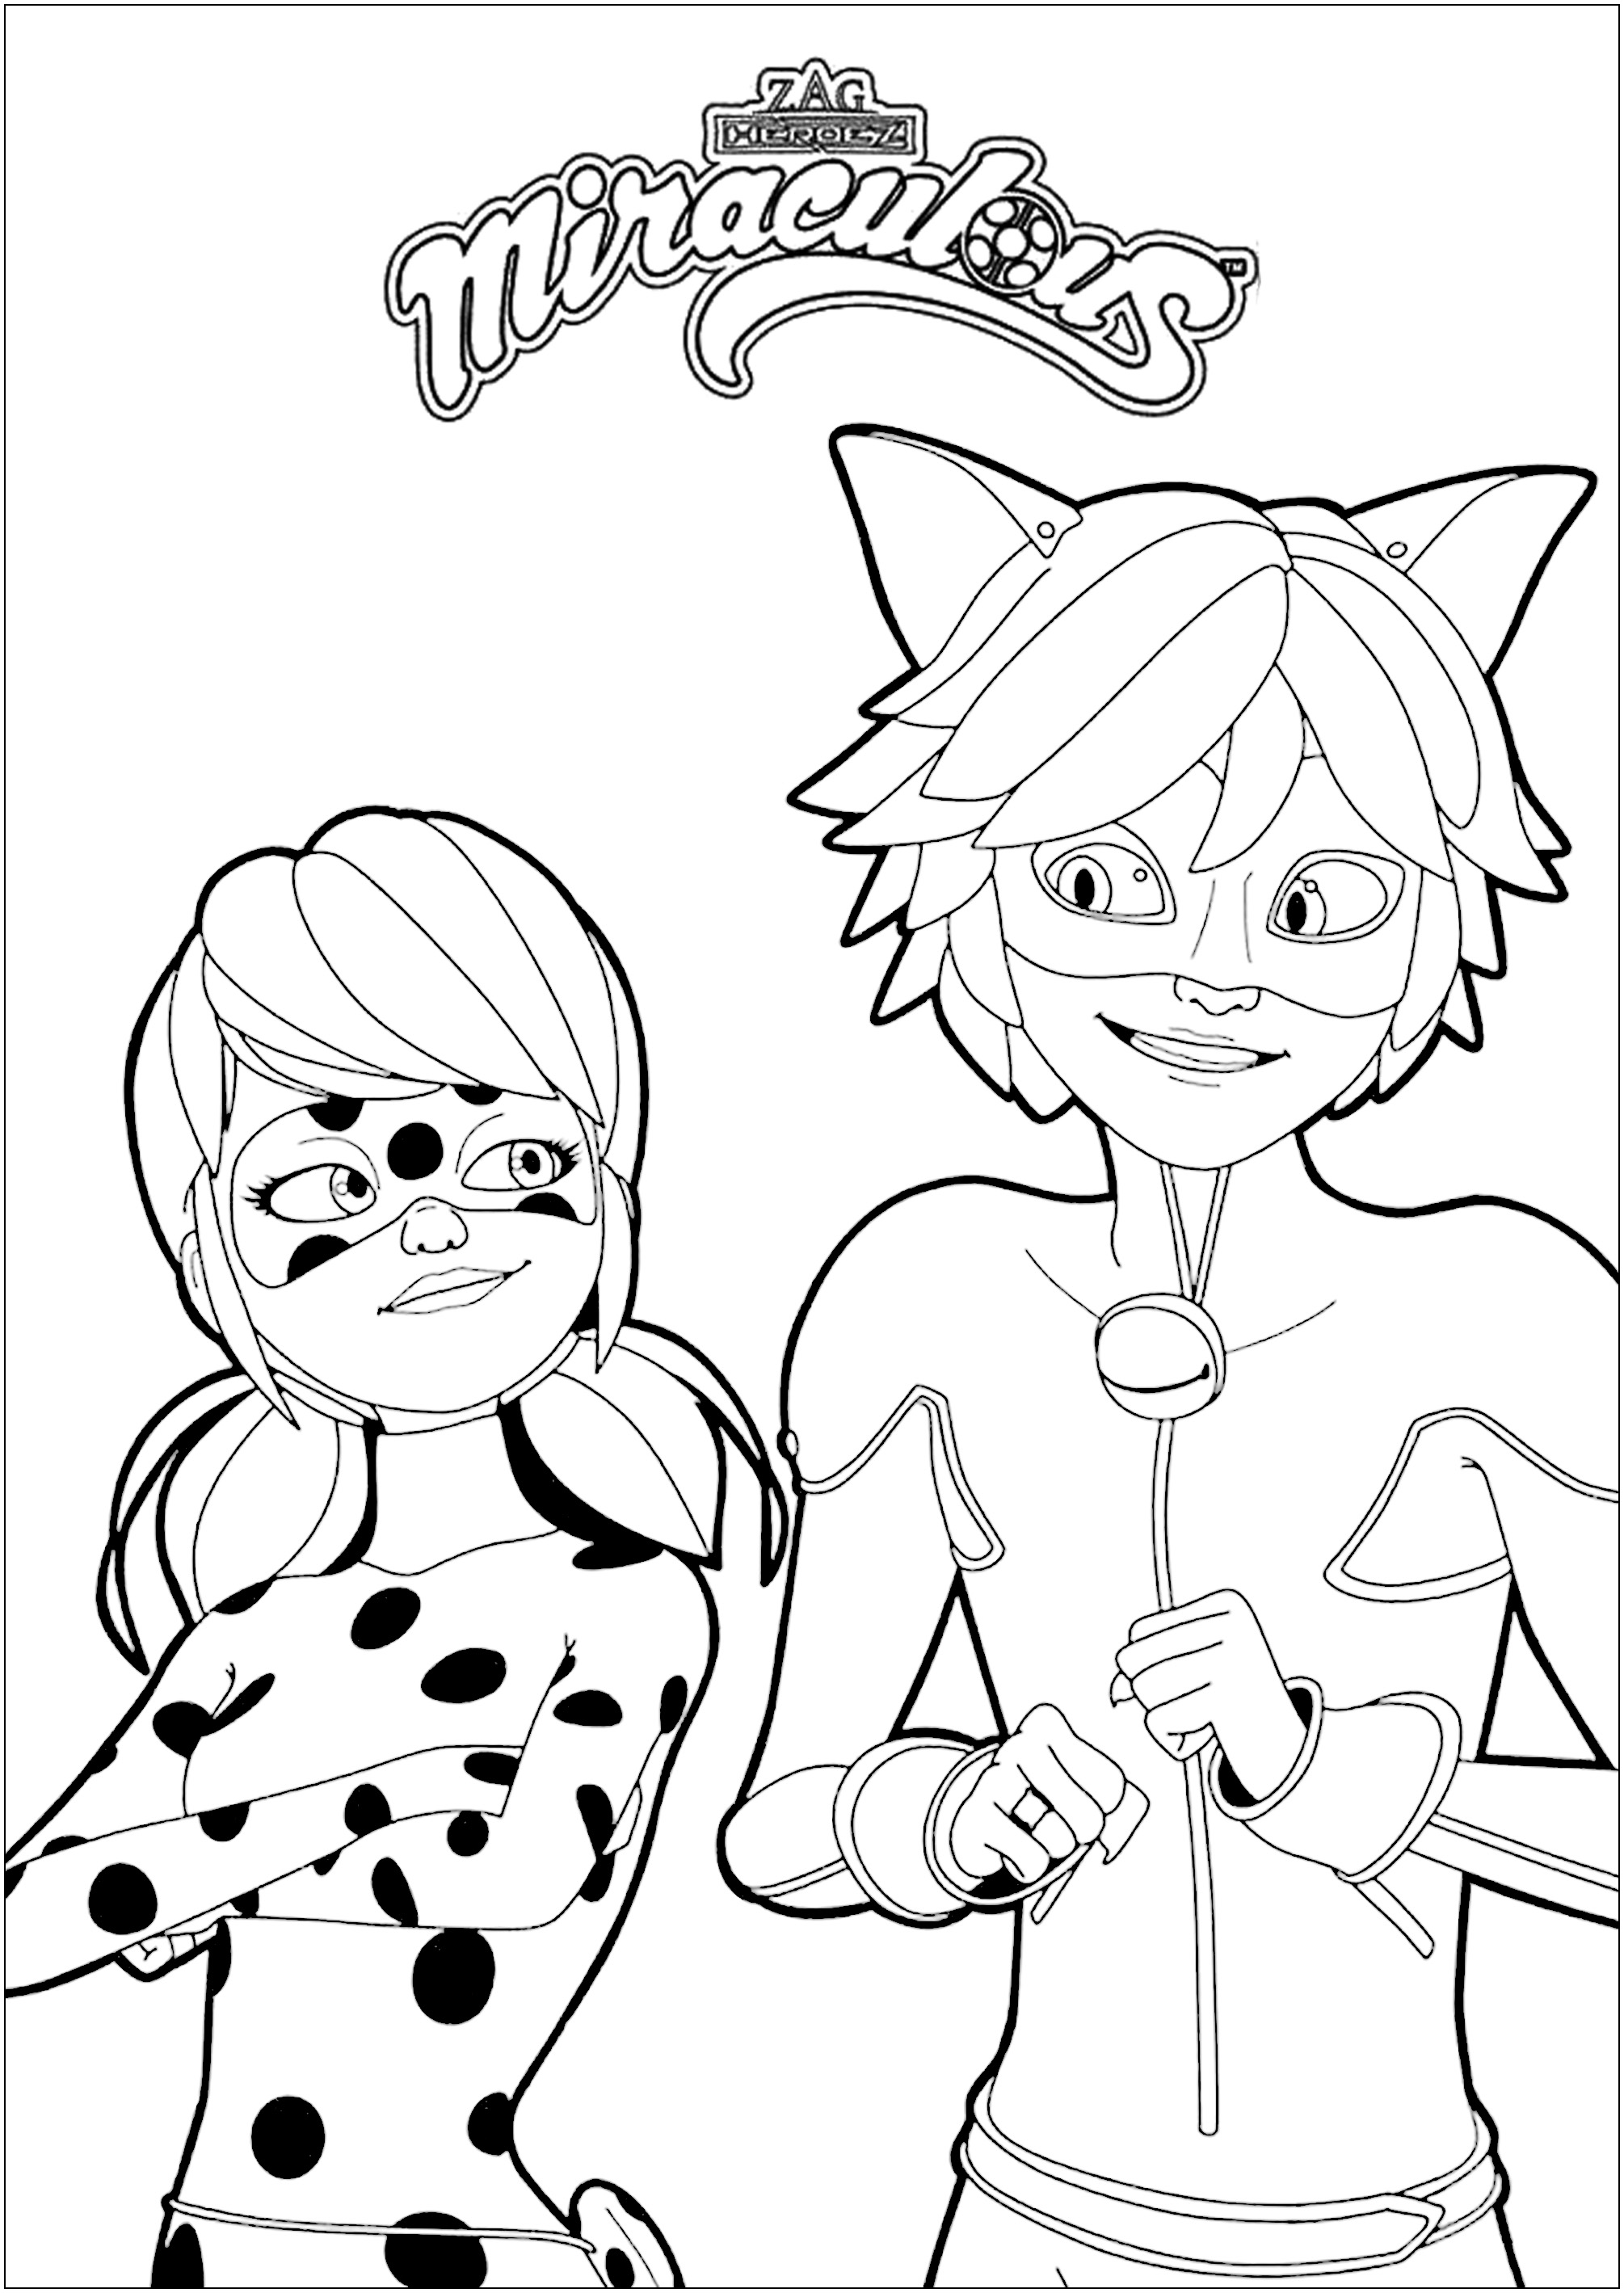 Lady bug / Miraculous coloring pages for children Miraculous